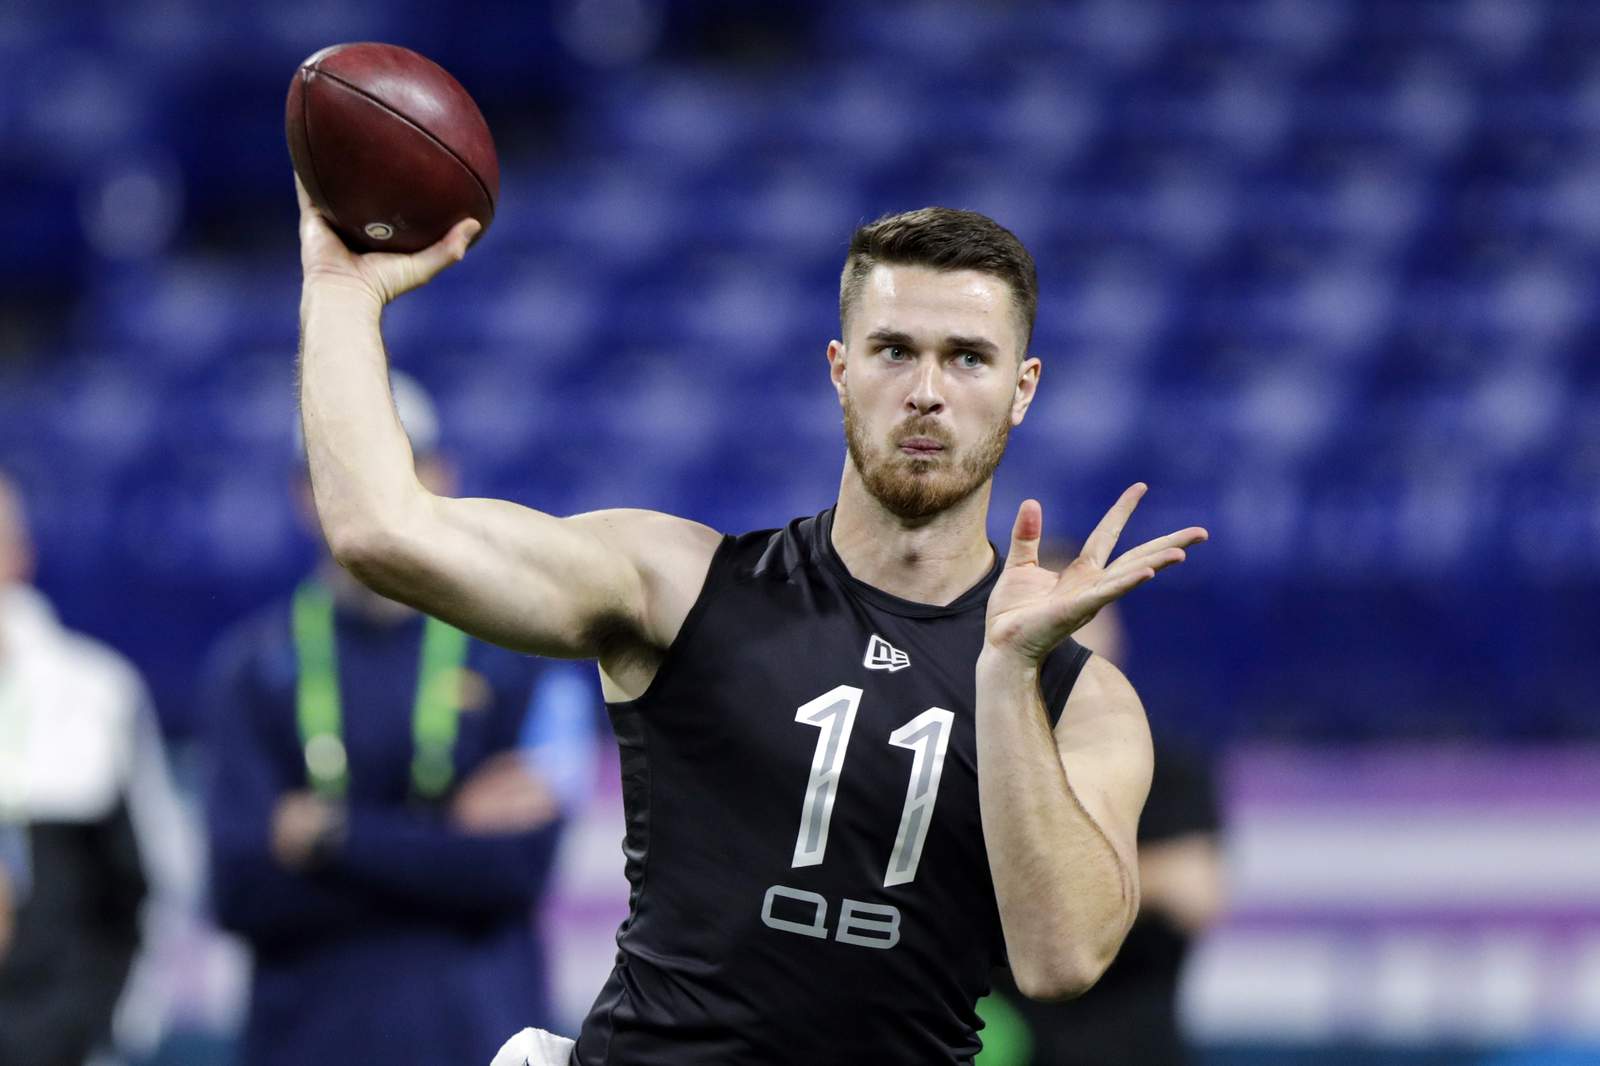 ’Dream come true’ for Jaguars rookie Jake Luton, but can he succeed on Sunday?